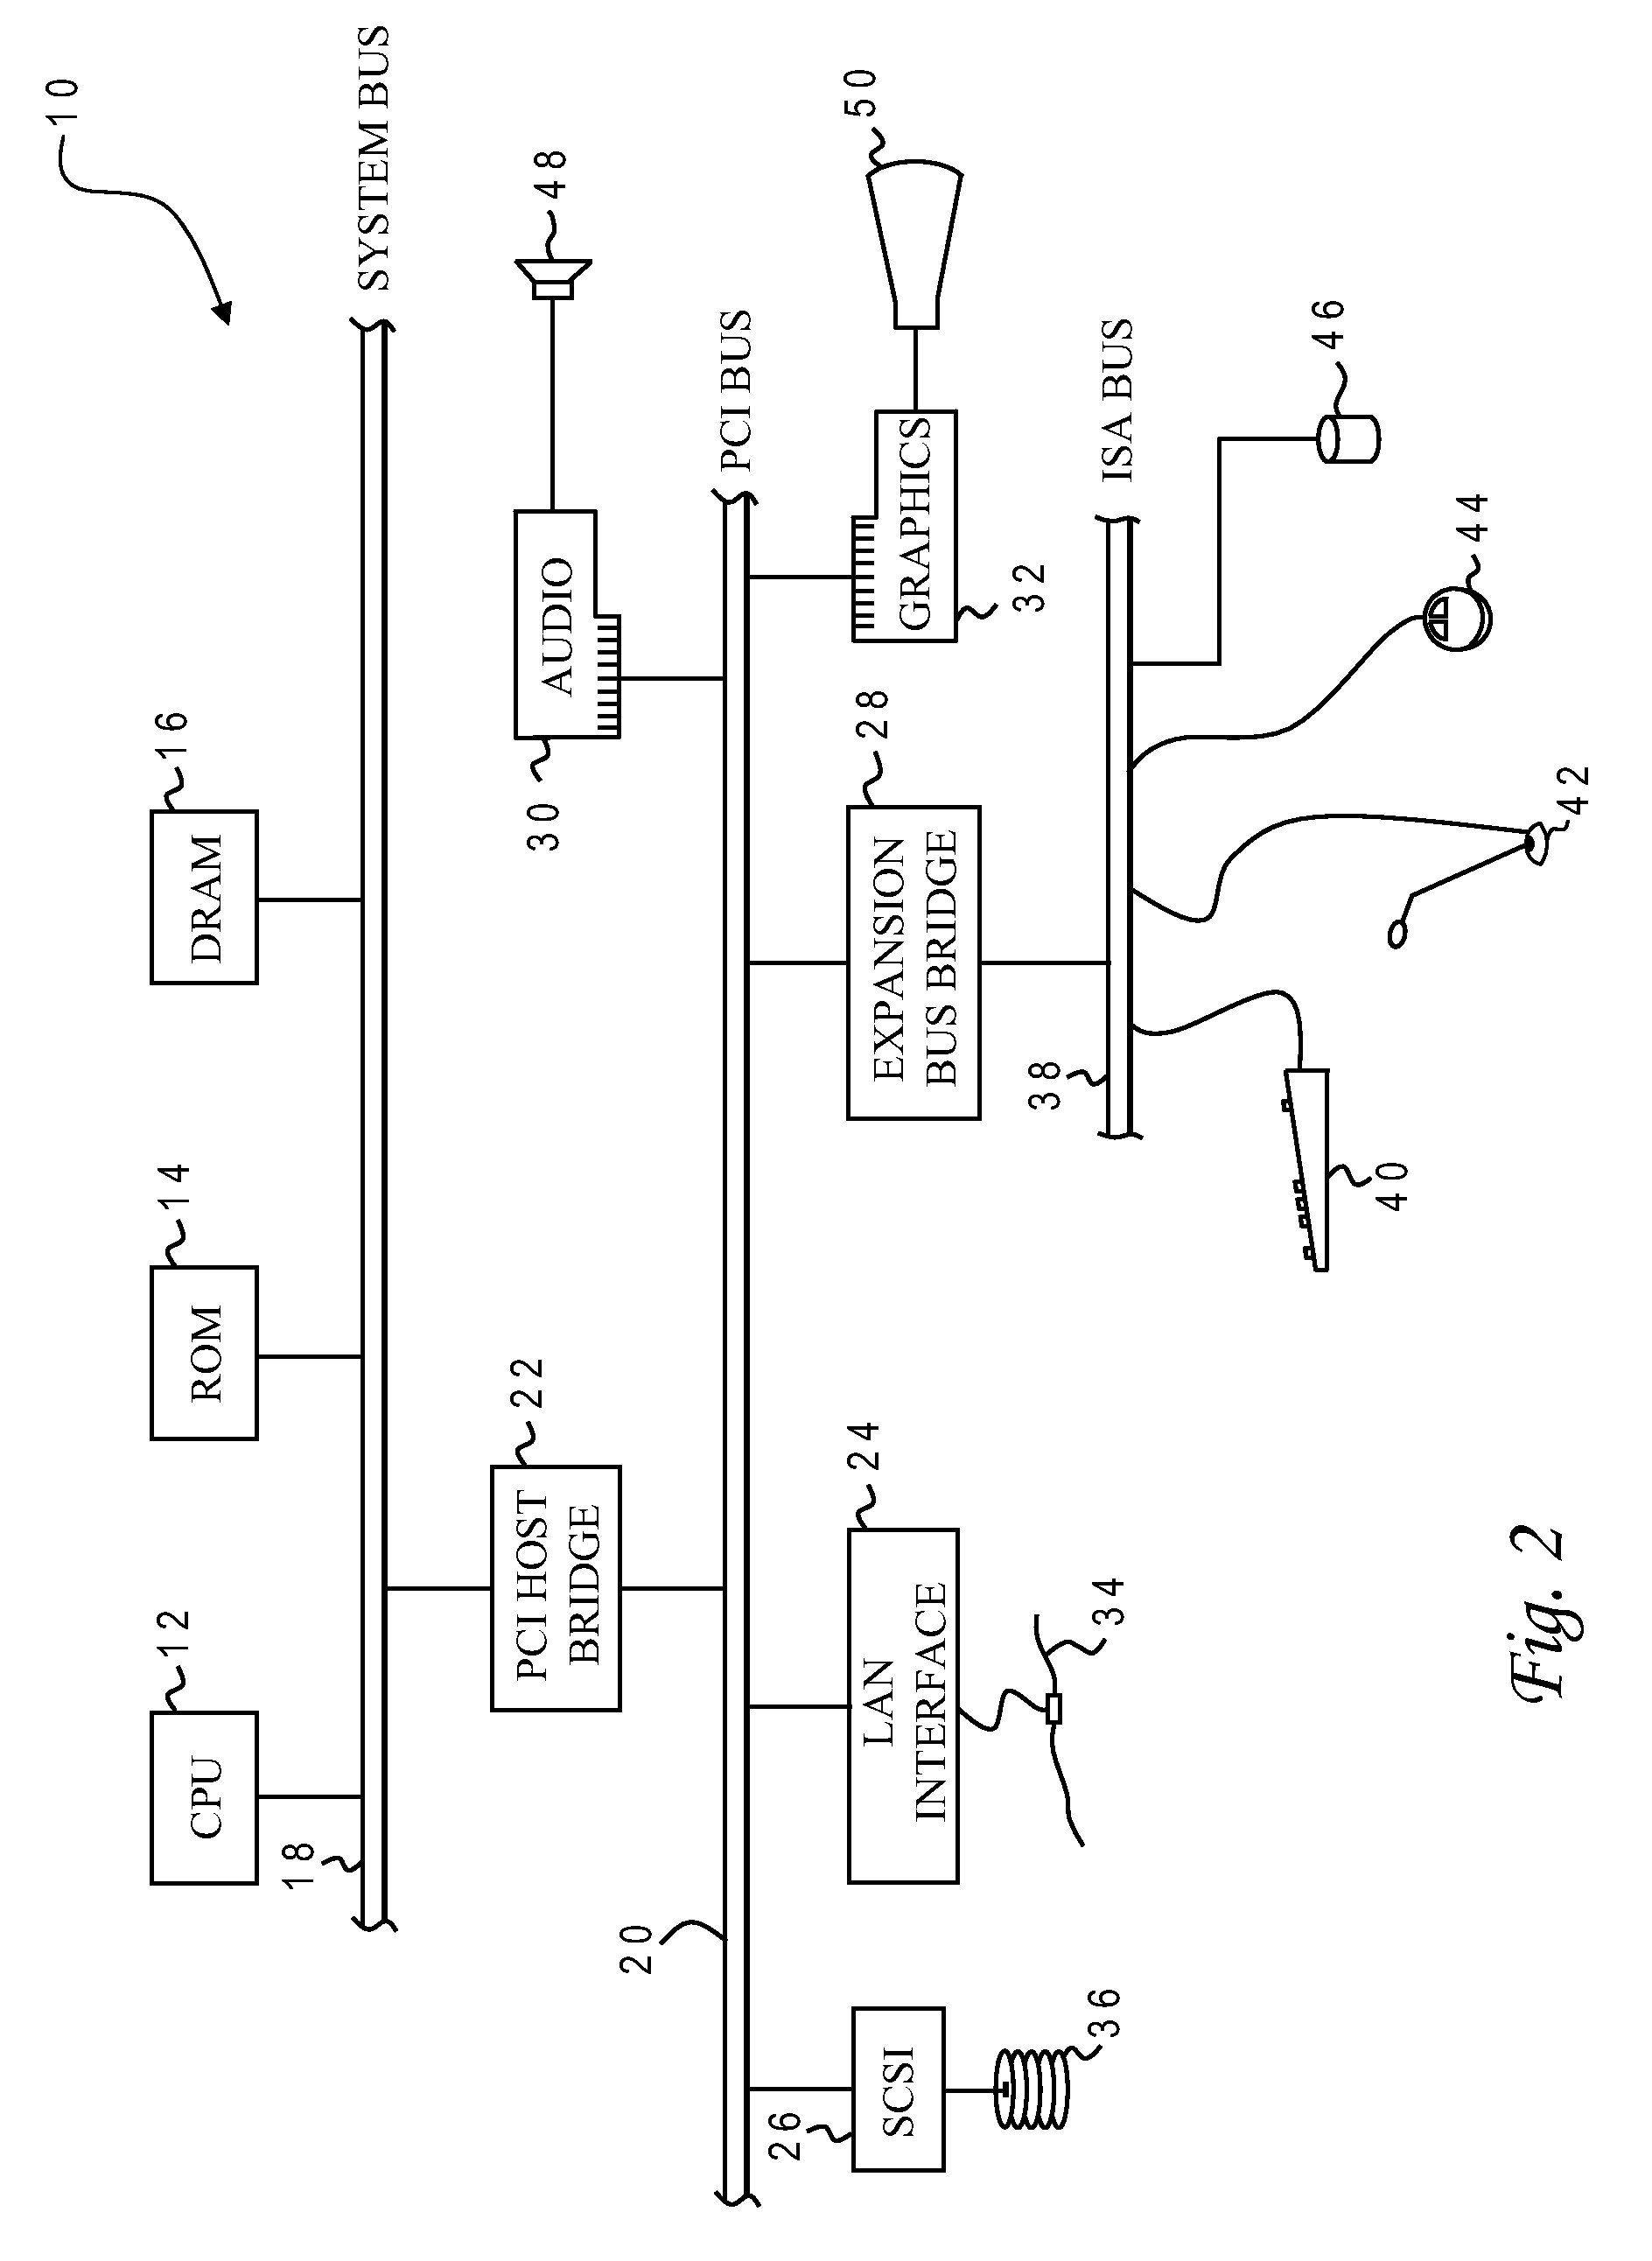 Buffer Insertion to Reduce Wirelength in VLSI Circuits